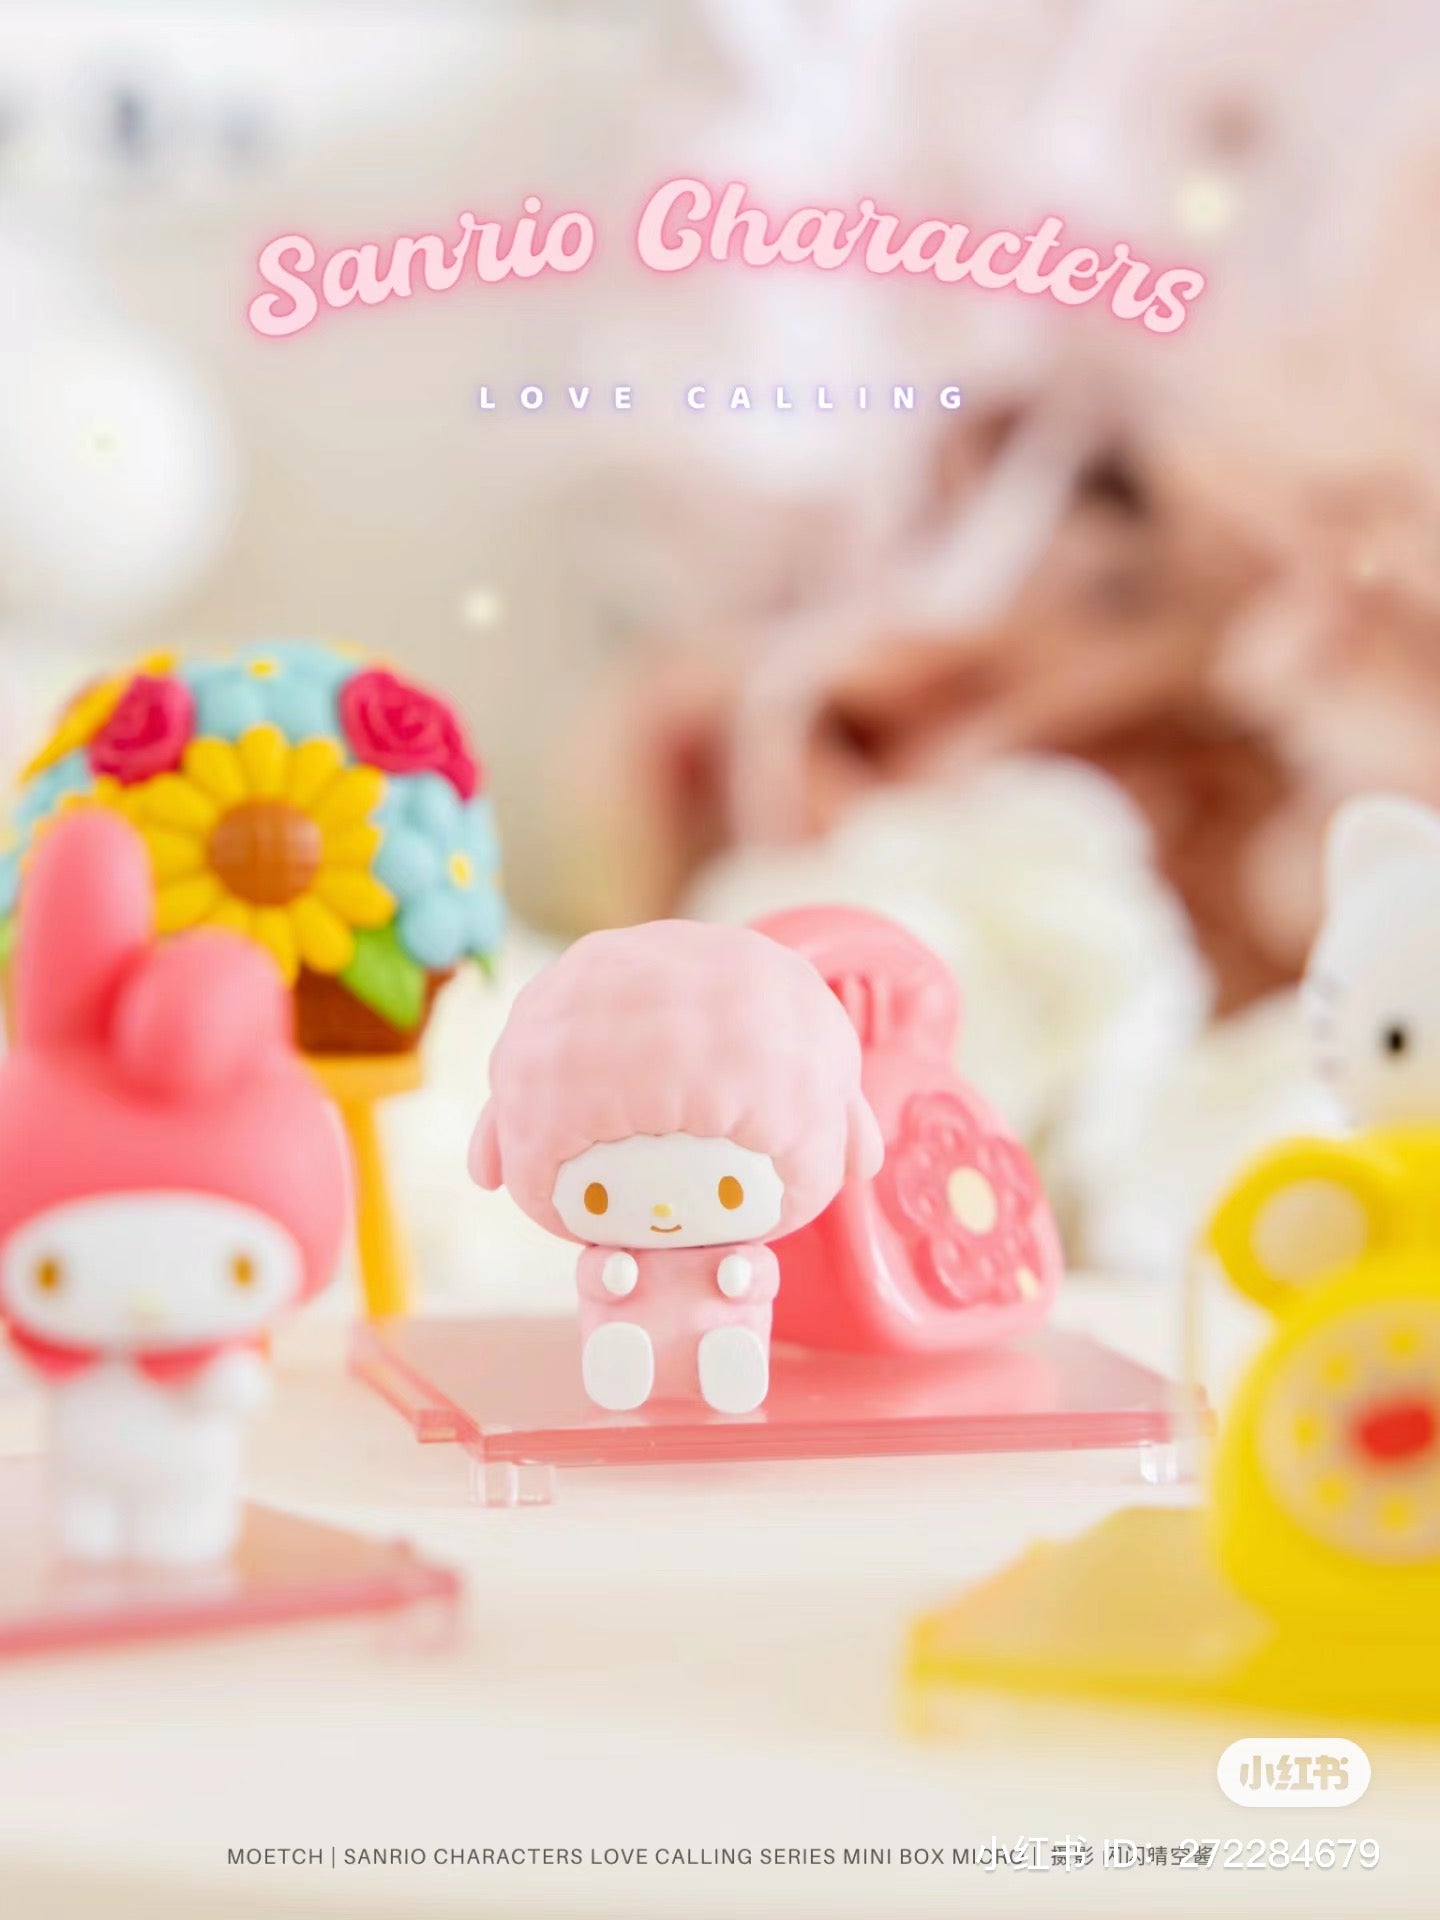 Alt text: Sanrio characters Love Calling Series Mini Box Micro Blind Box Series featuring small collectible figurines.